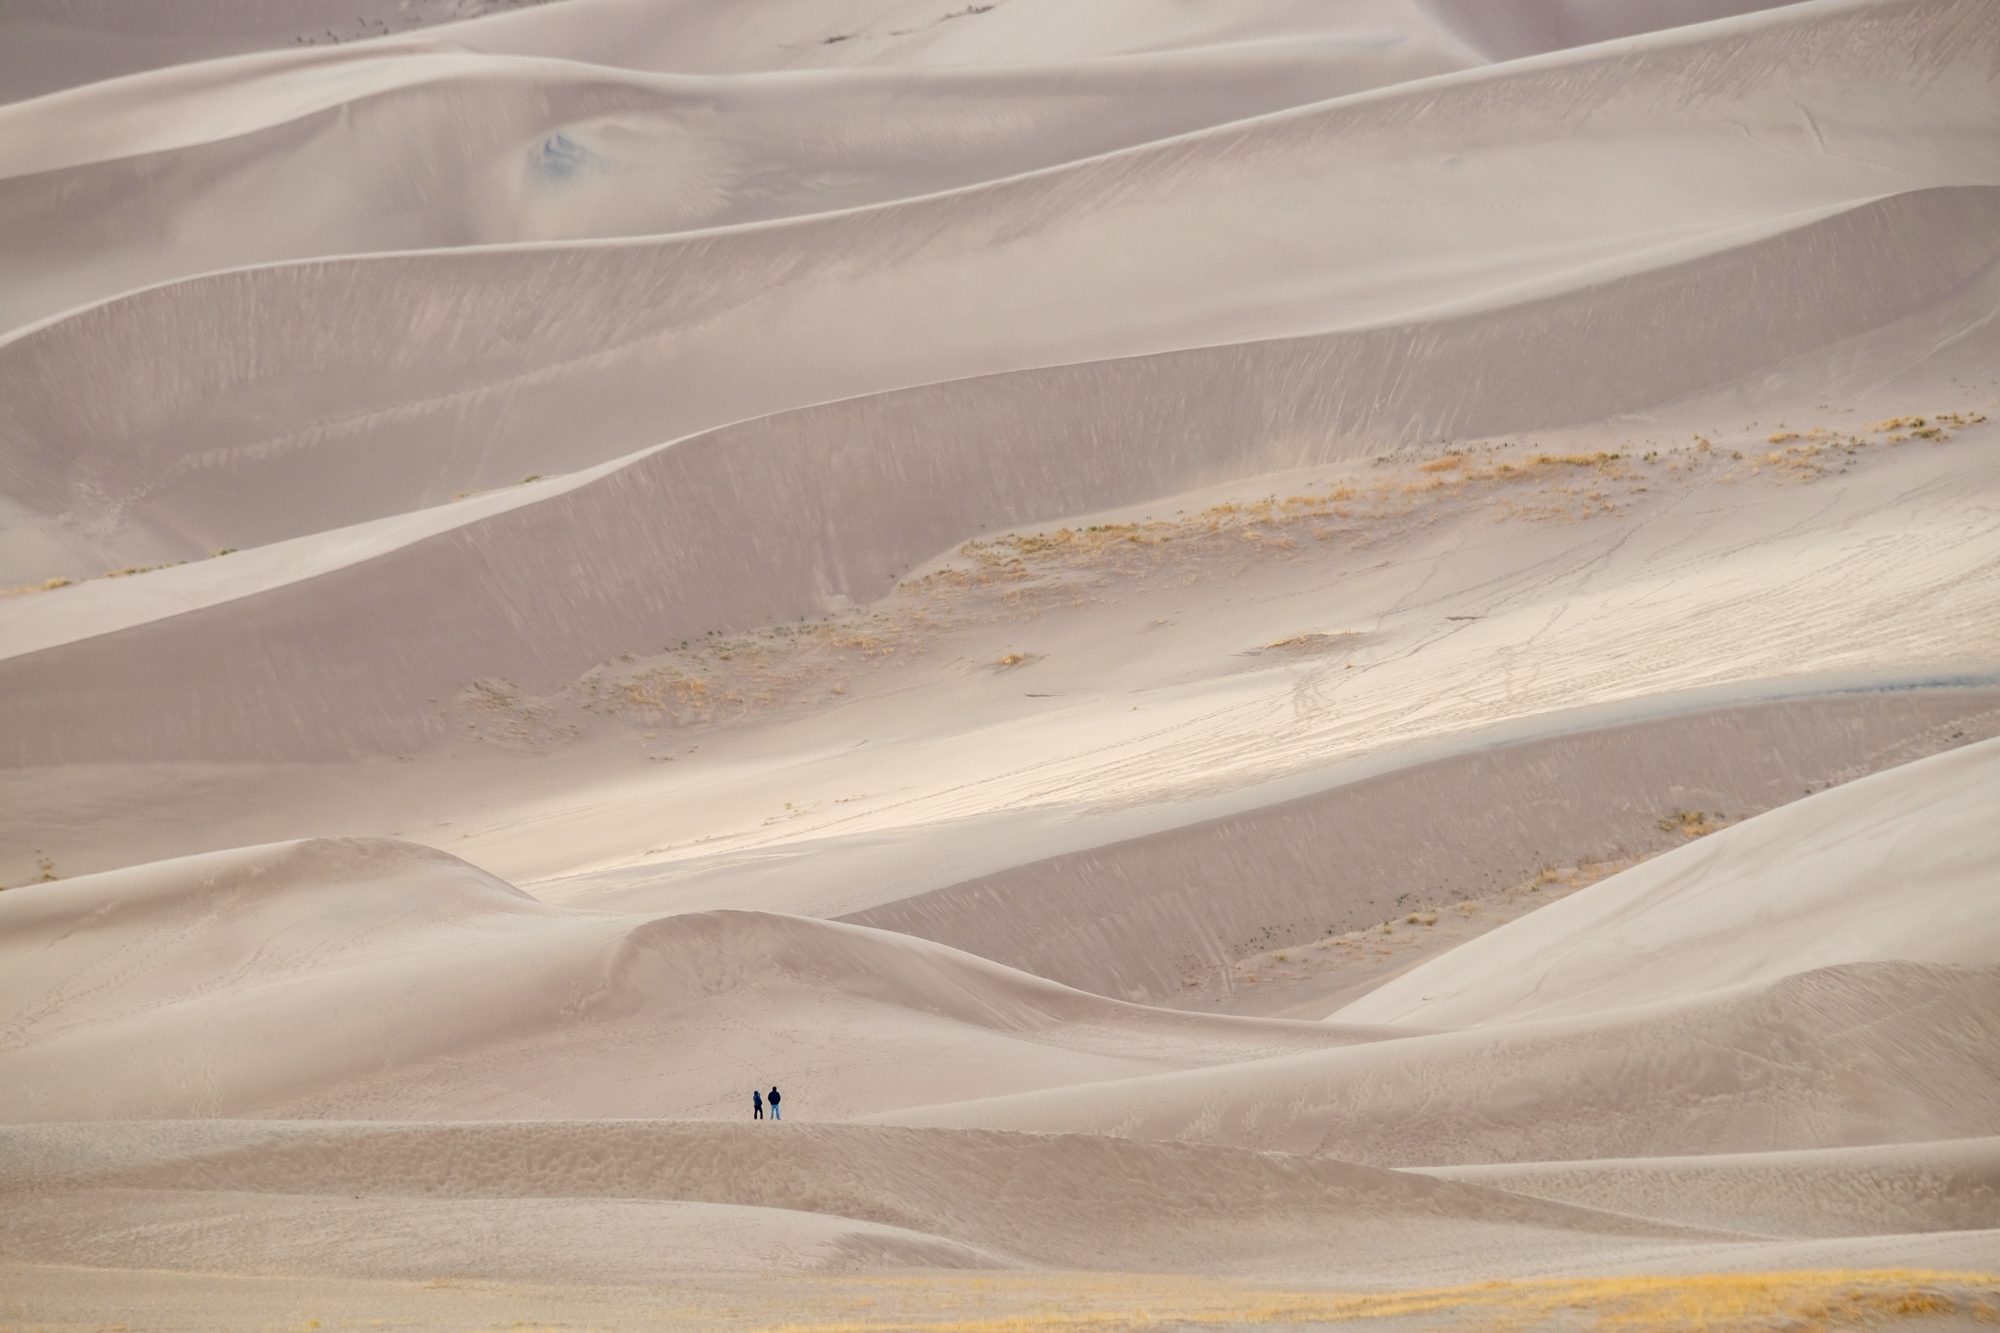 Great Sand Dunes National Park — The Greatest American Road Trip